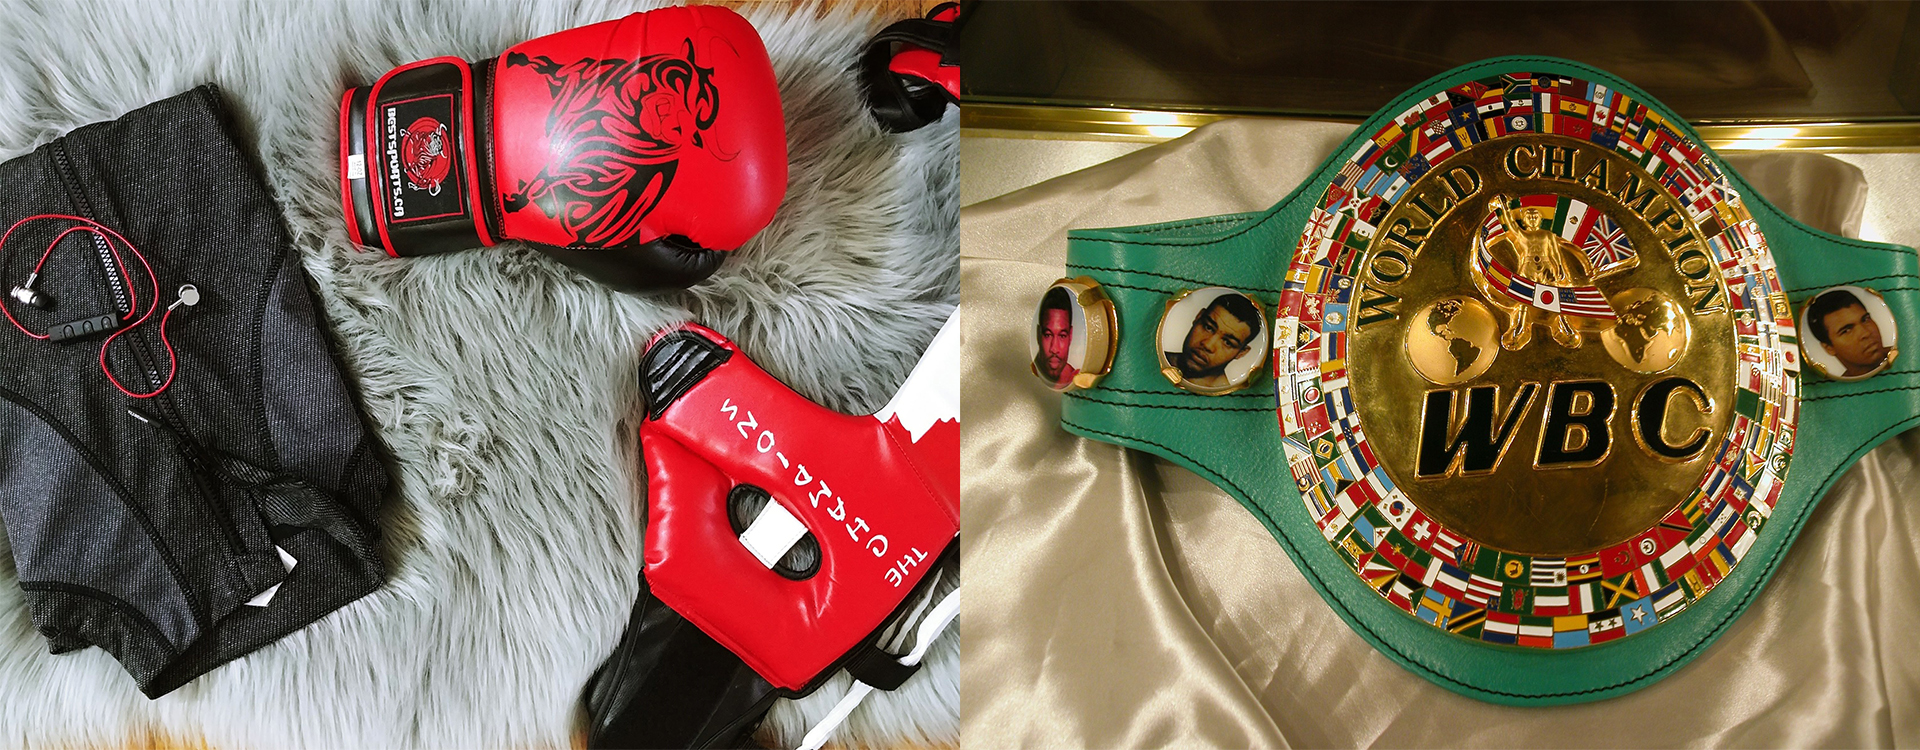 Safety equipment gifts for boxing